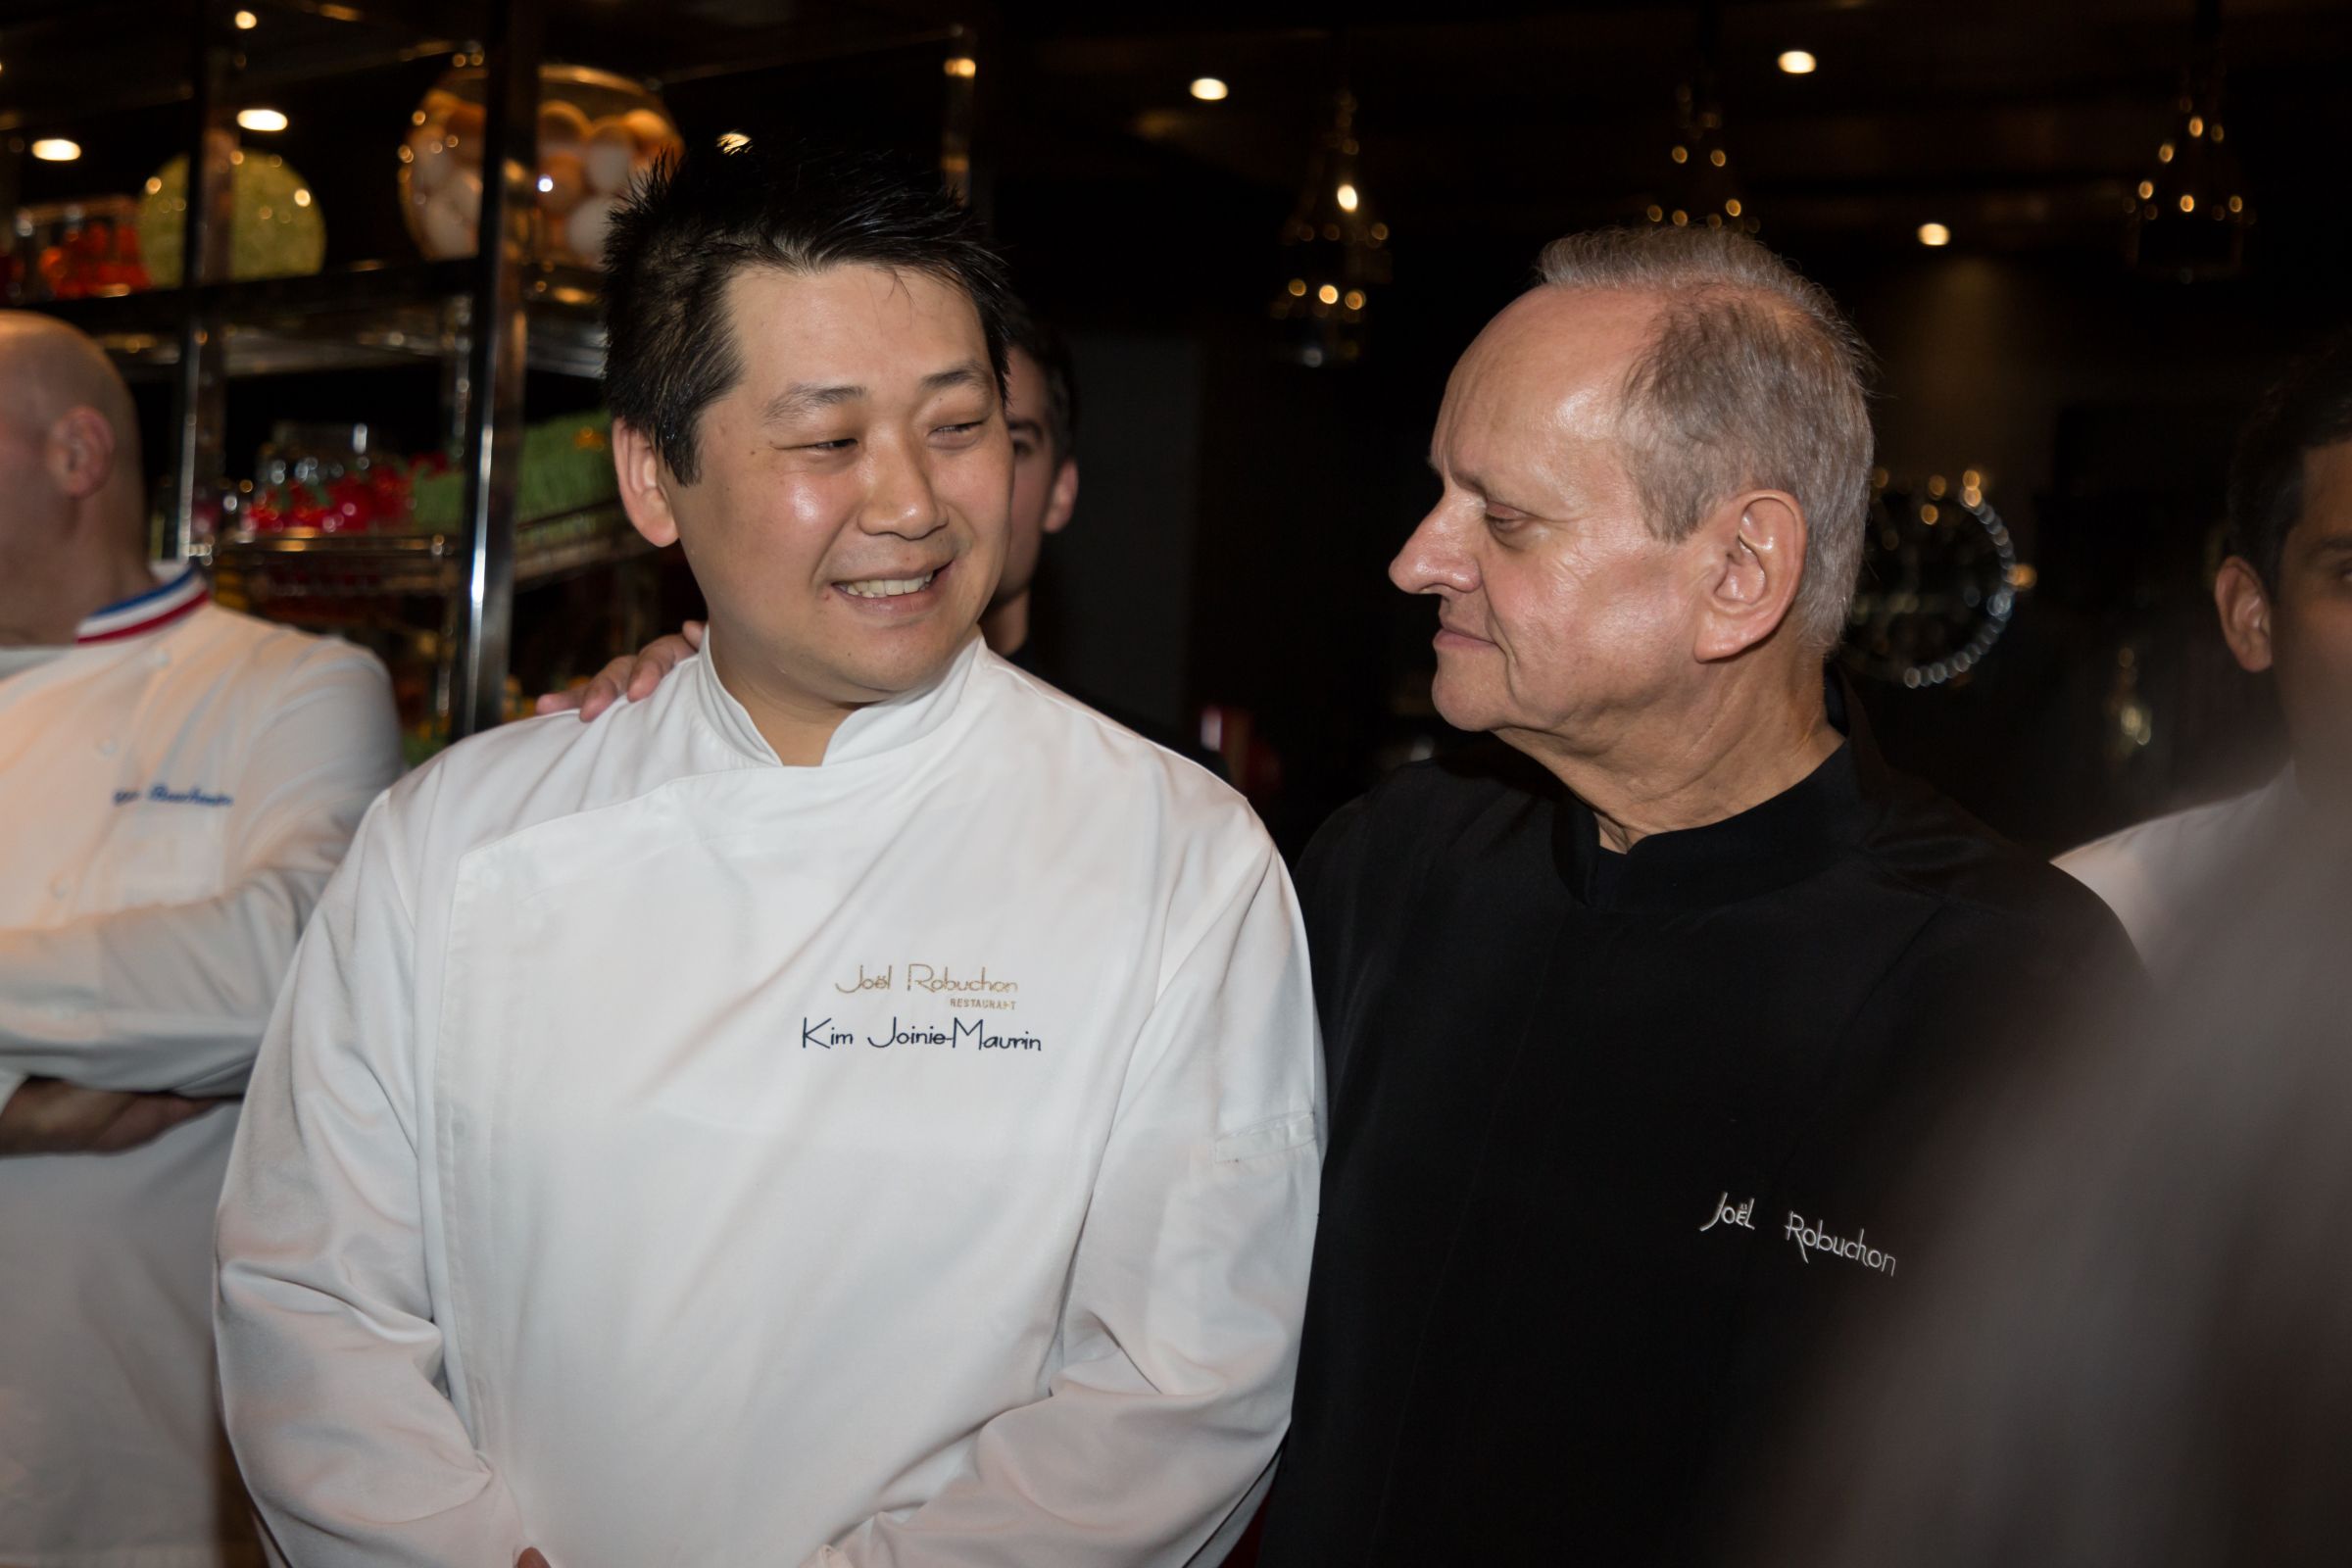 , Joël Robuchon introduces the two new head chefs for L’Atelier Joël Robuchon and Joël Robuchon Restaurant, Singapore